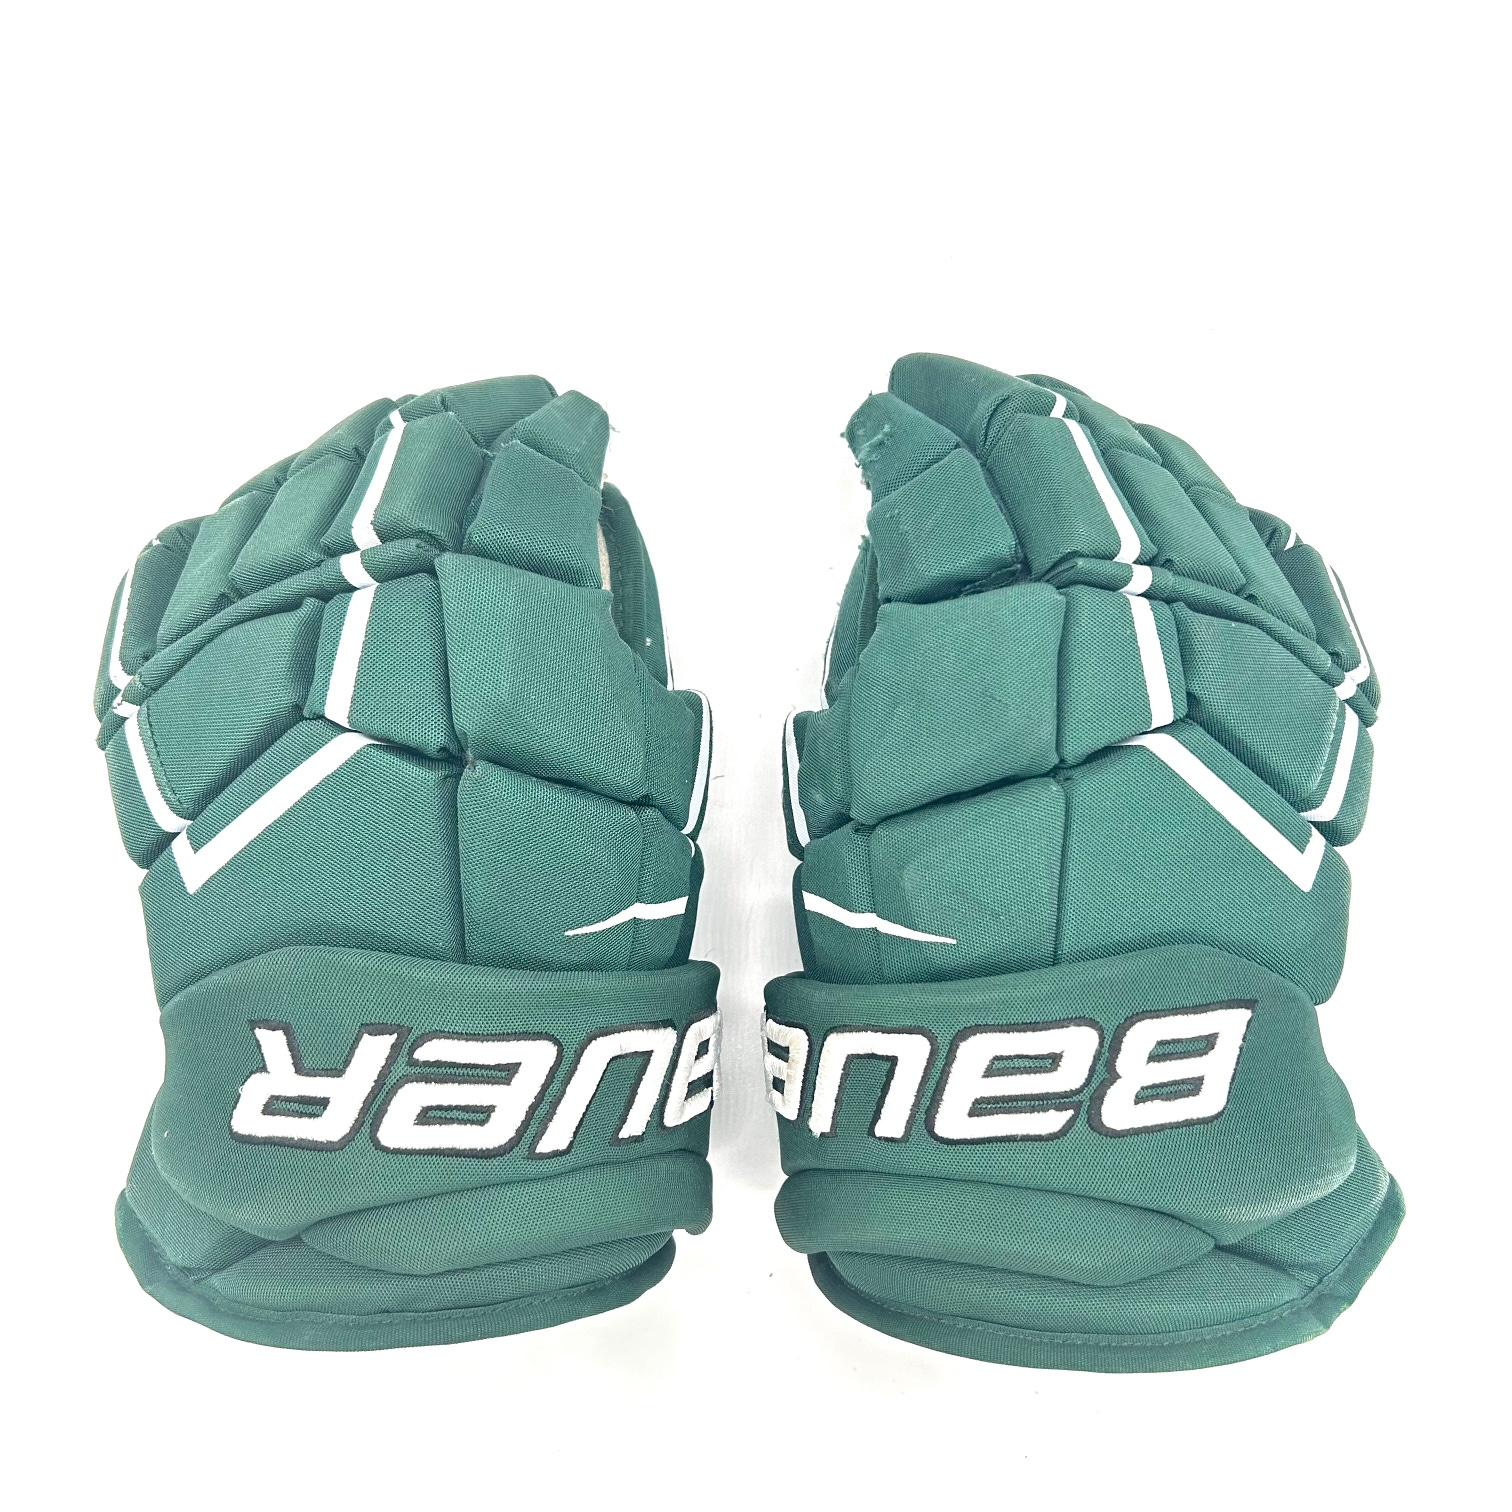 Bauer Supreme UltraSonic - Used NCAA Pro Stock Gloves (Green)